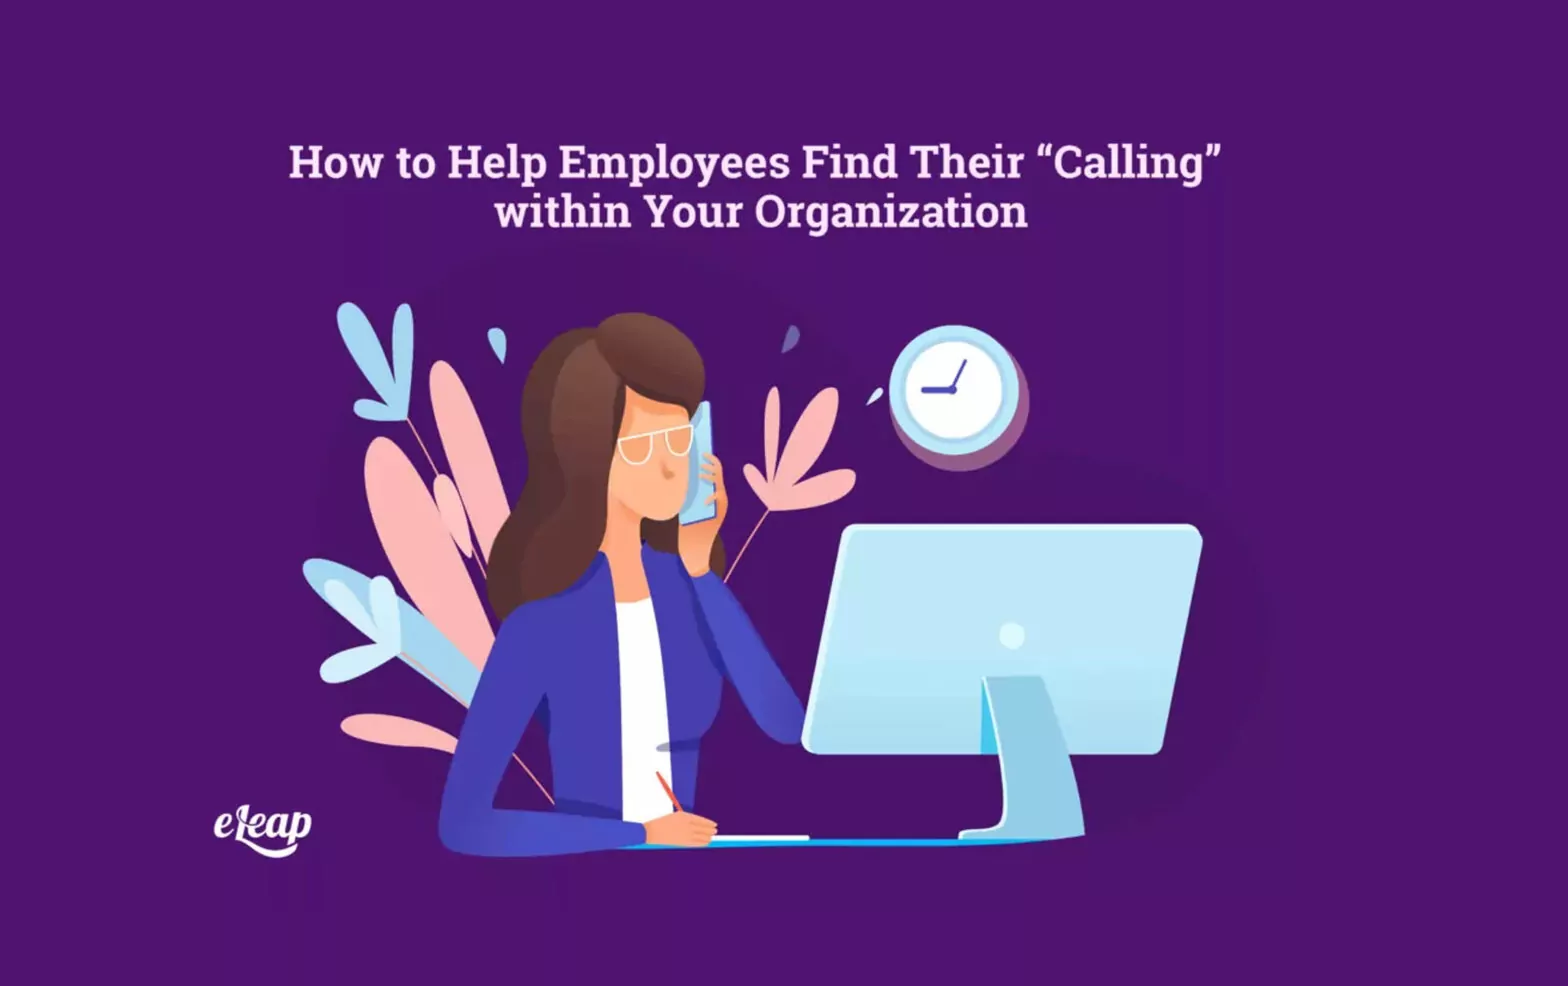 How to Help Employees Find Their “Calling” within Your Organization